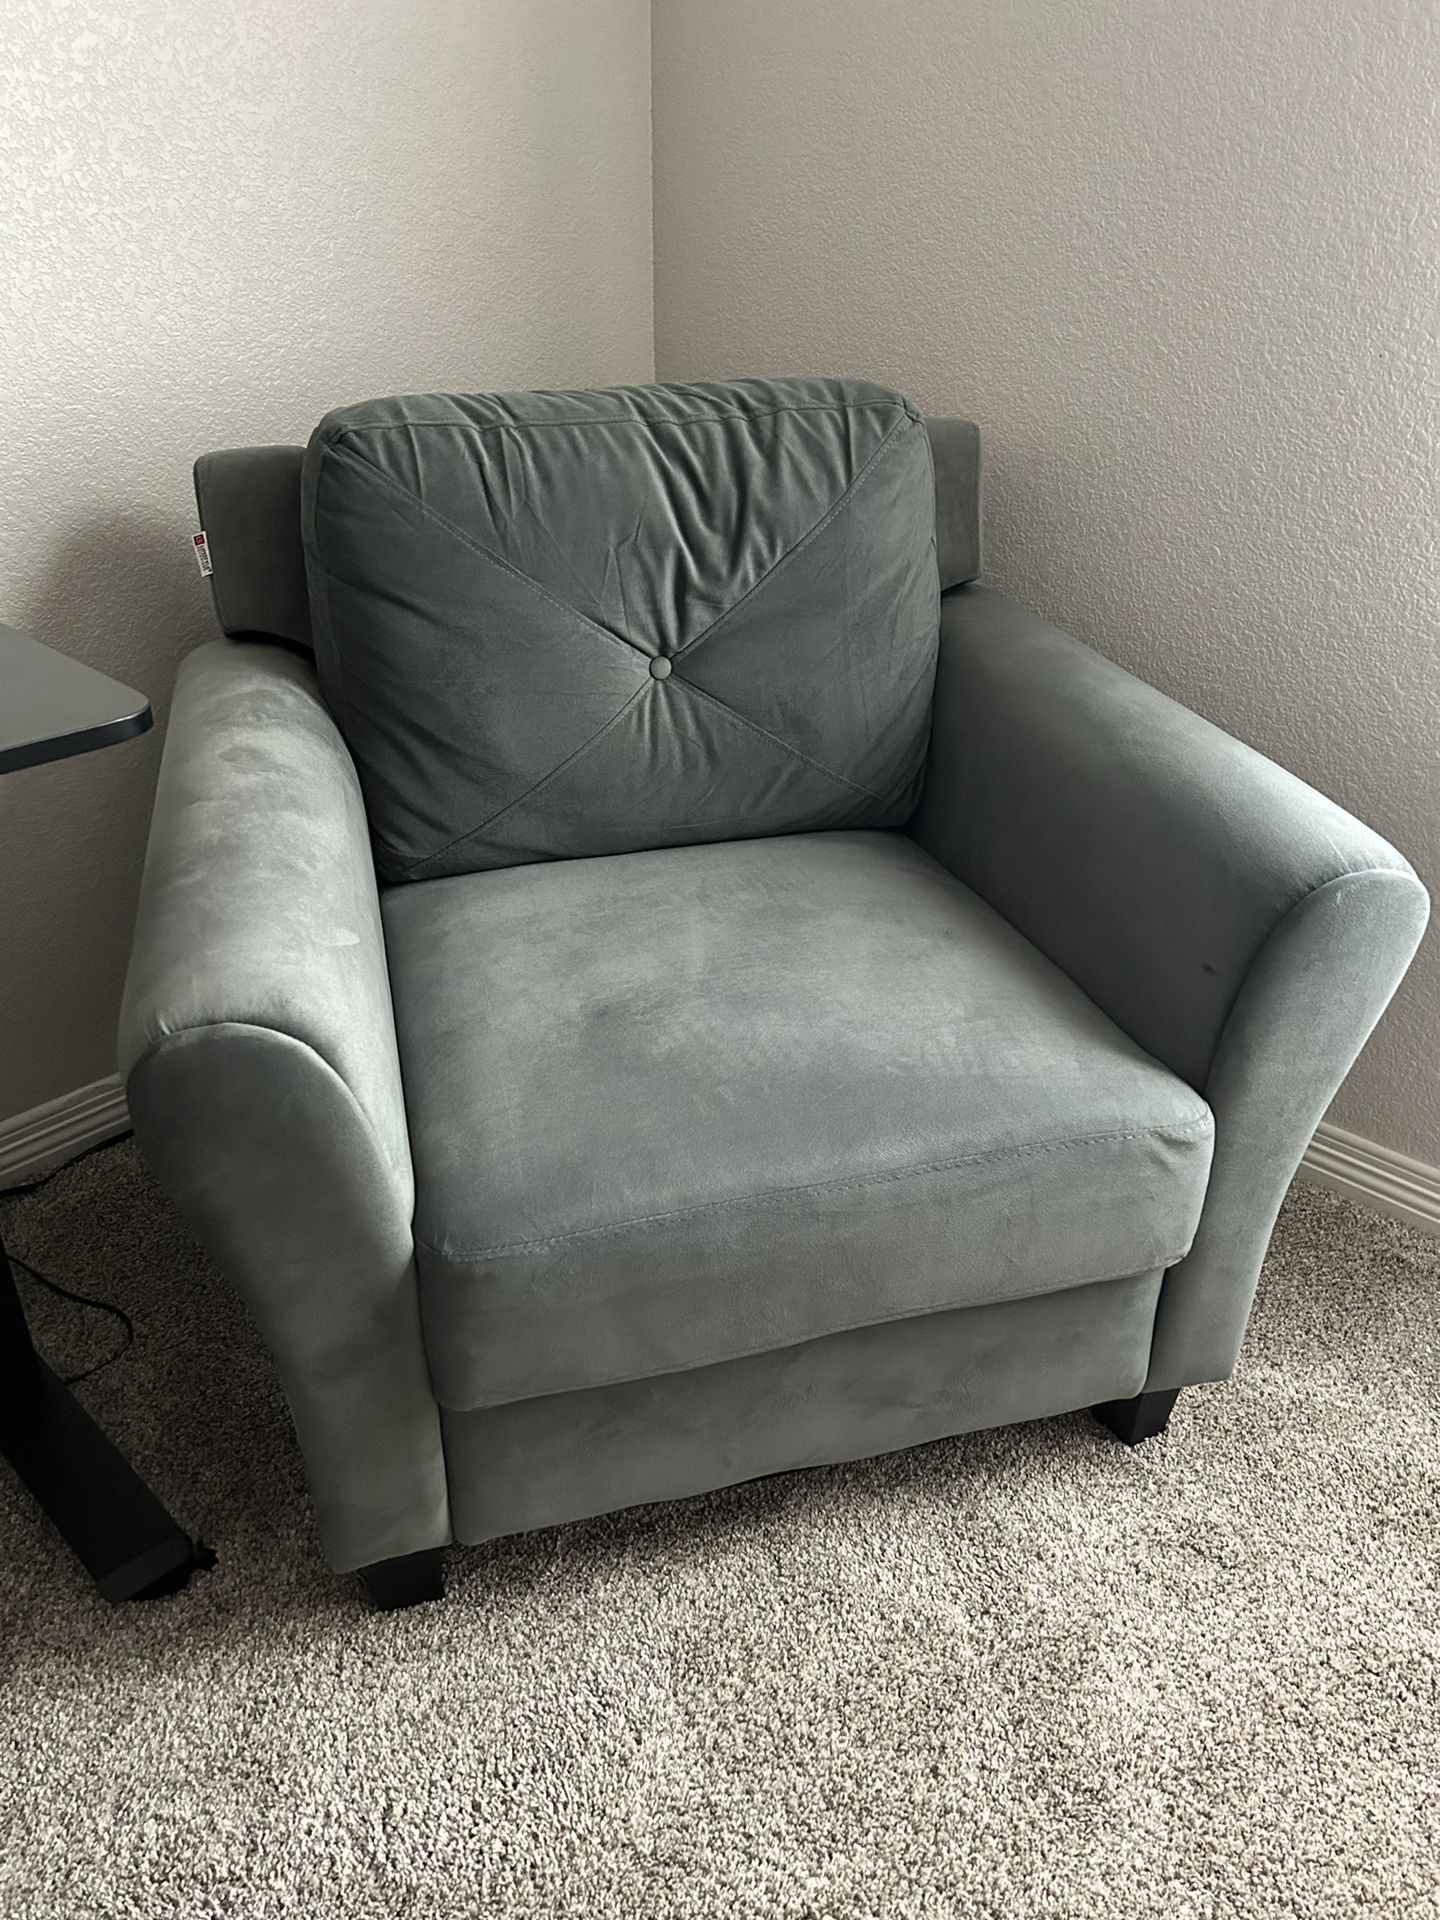 Blue/Gray Lounge Chair